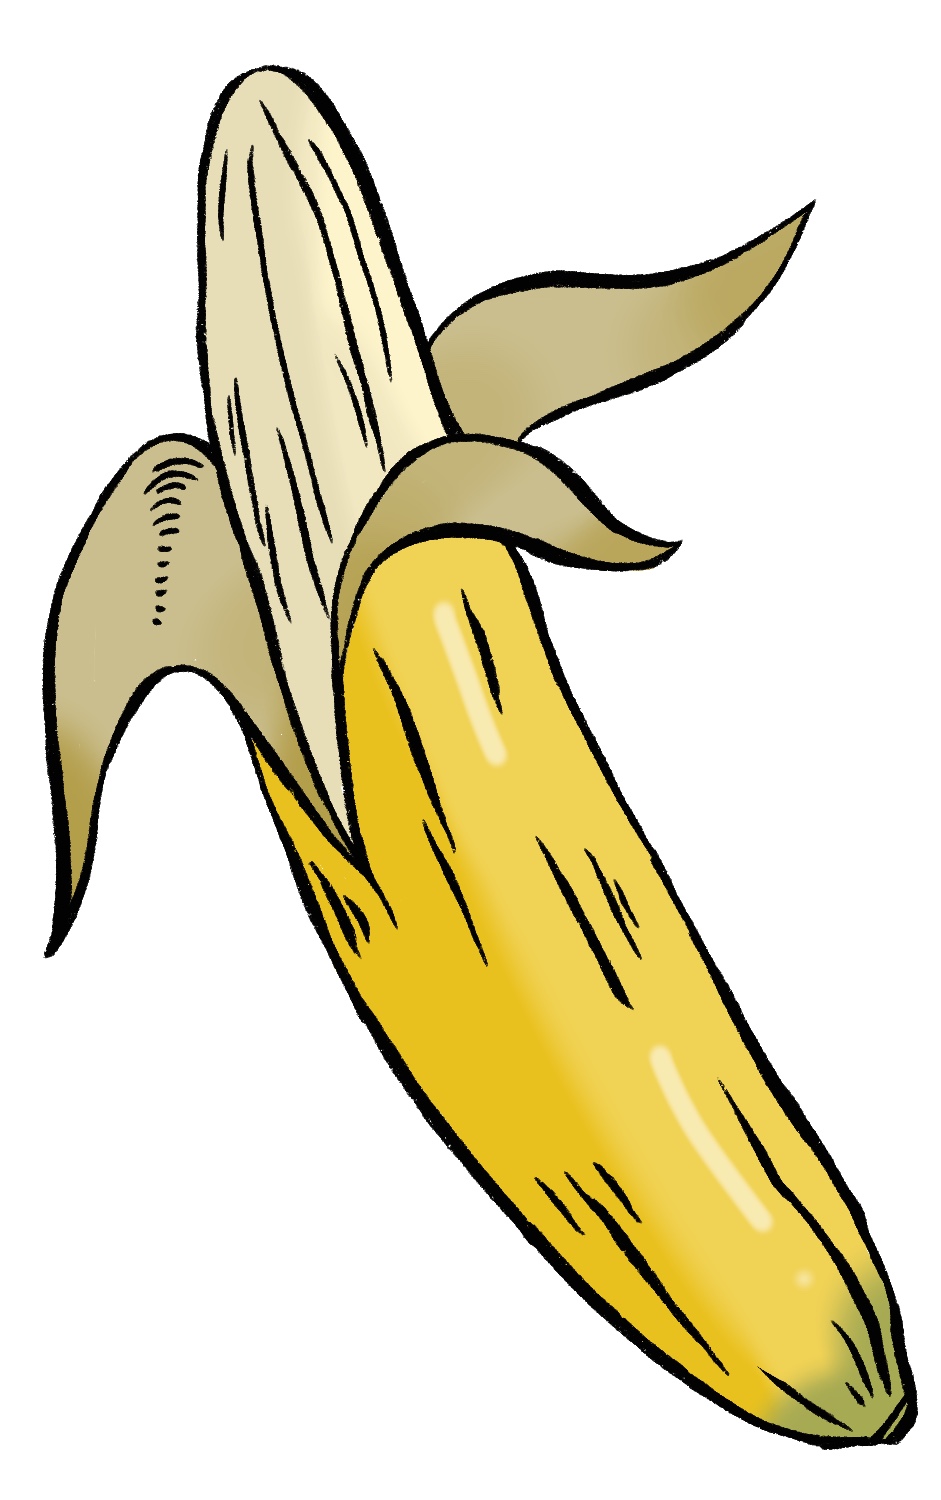 Pencil Drawing And Watercolor Paints Banana Fruit High-Res Vector Graphic -  Getty Images